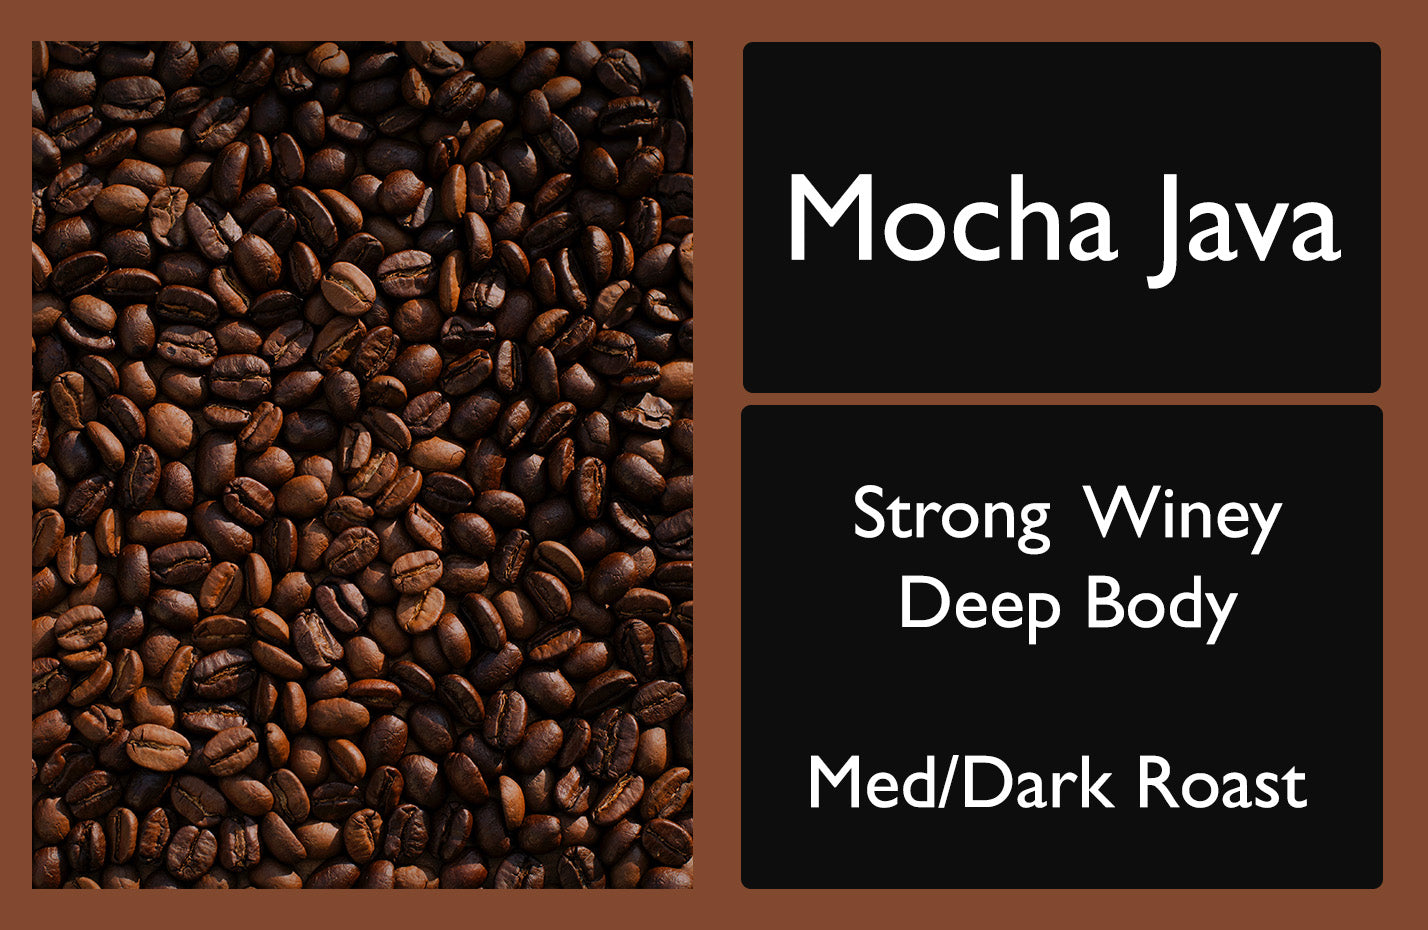 Picture of a bag of Mocha Java Coffee